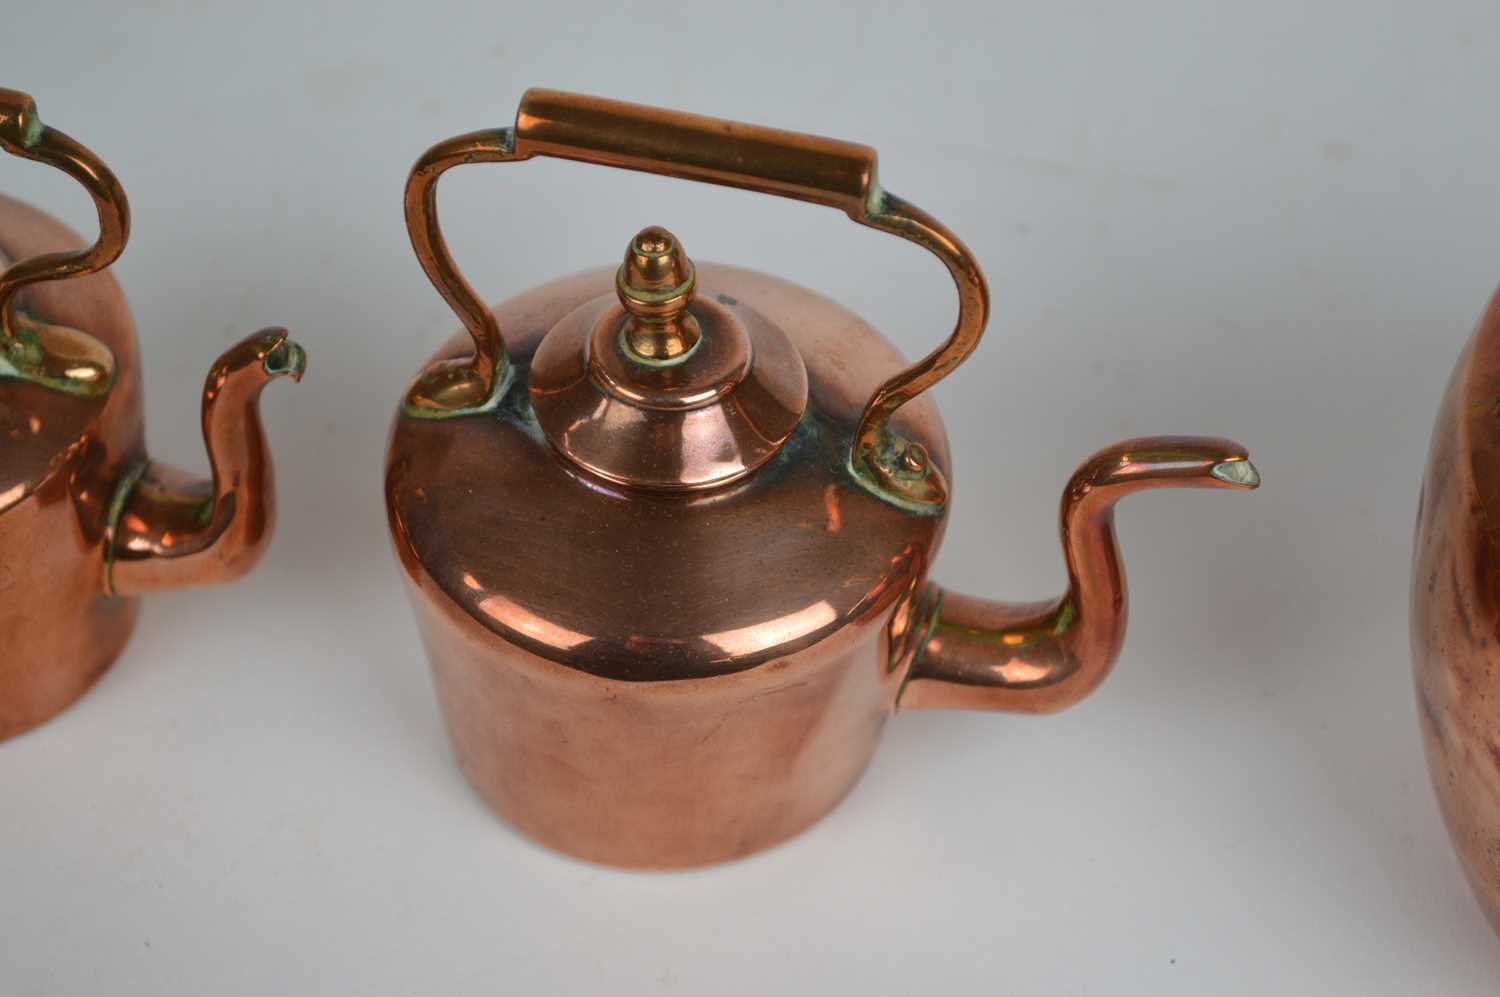 Matched Set of Four Graduated Miniature Copper Kettles - Image 4 of 5